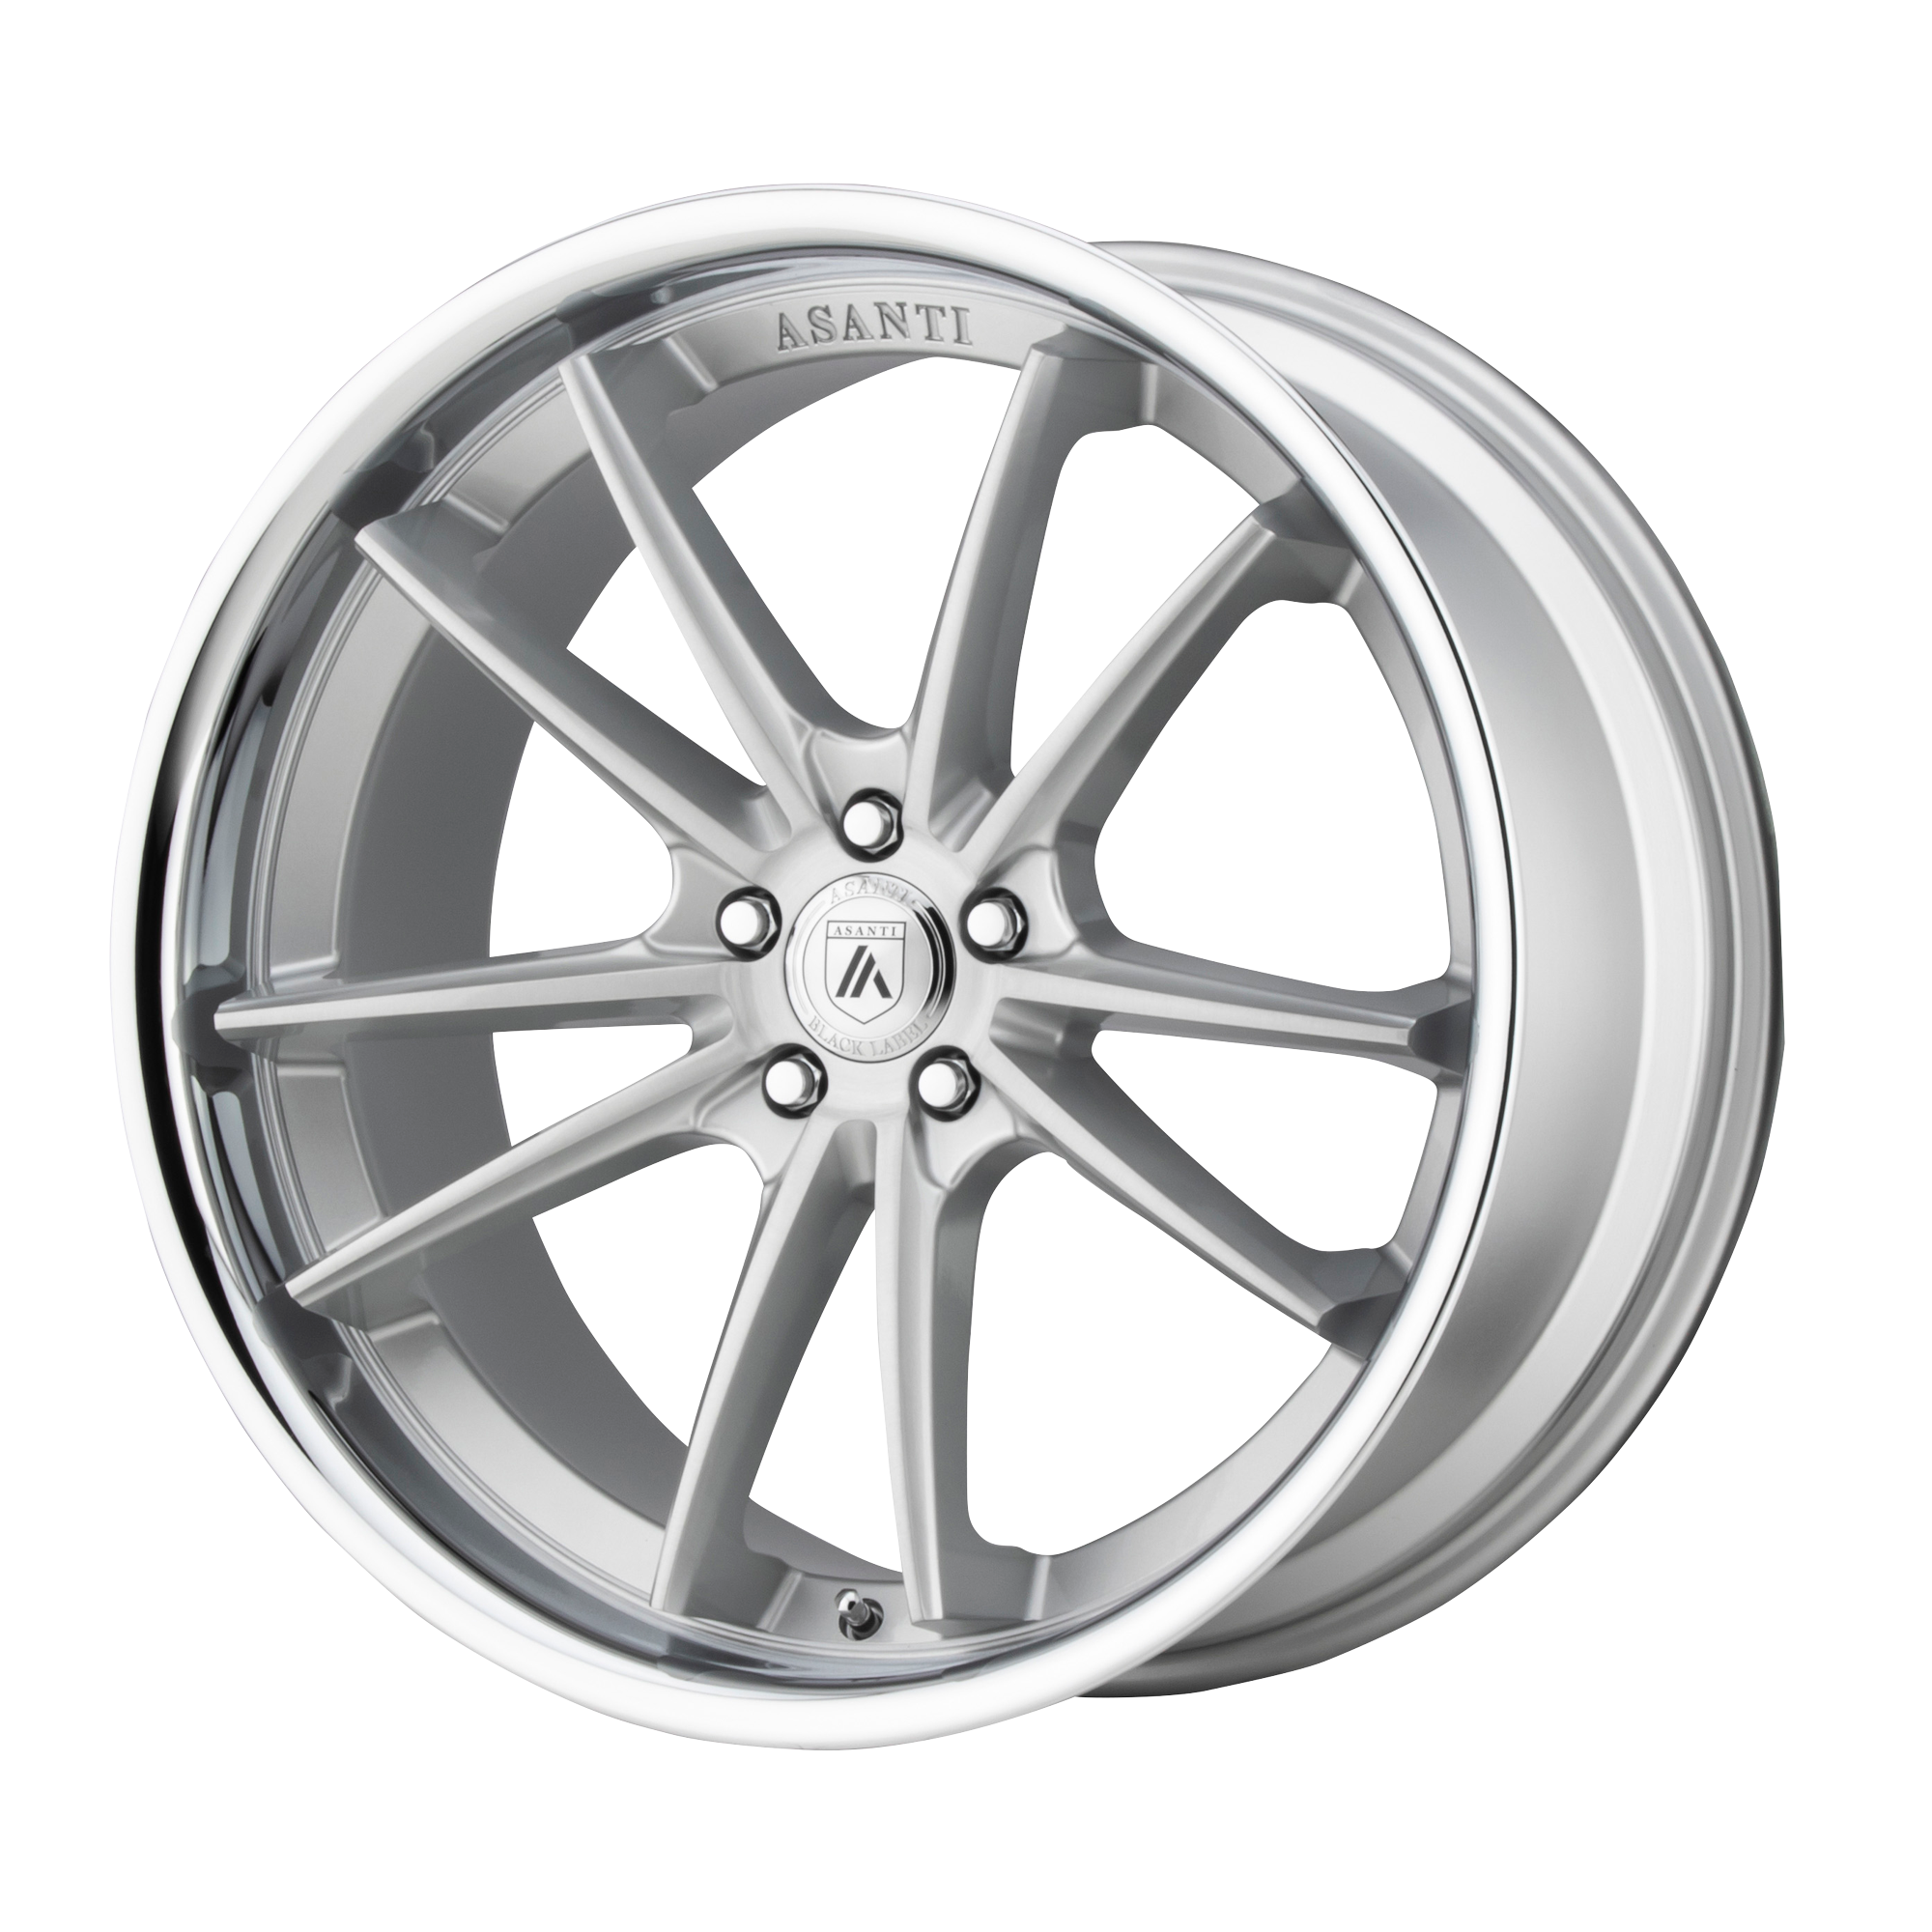 DELTA 20x10.5 5x120.00 BRUSHED SILVER W/ CHROME LIP (38 mm) - Tires and Engine Performance